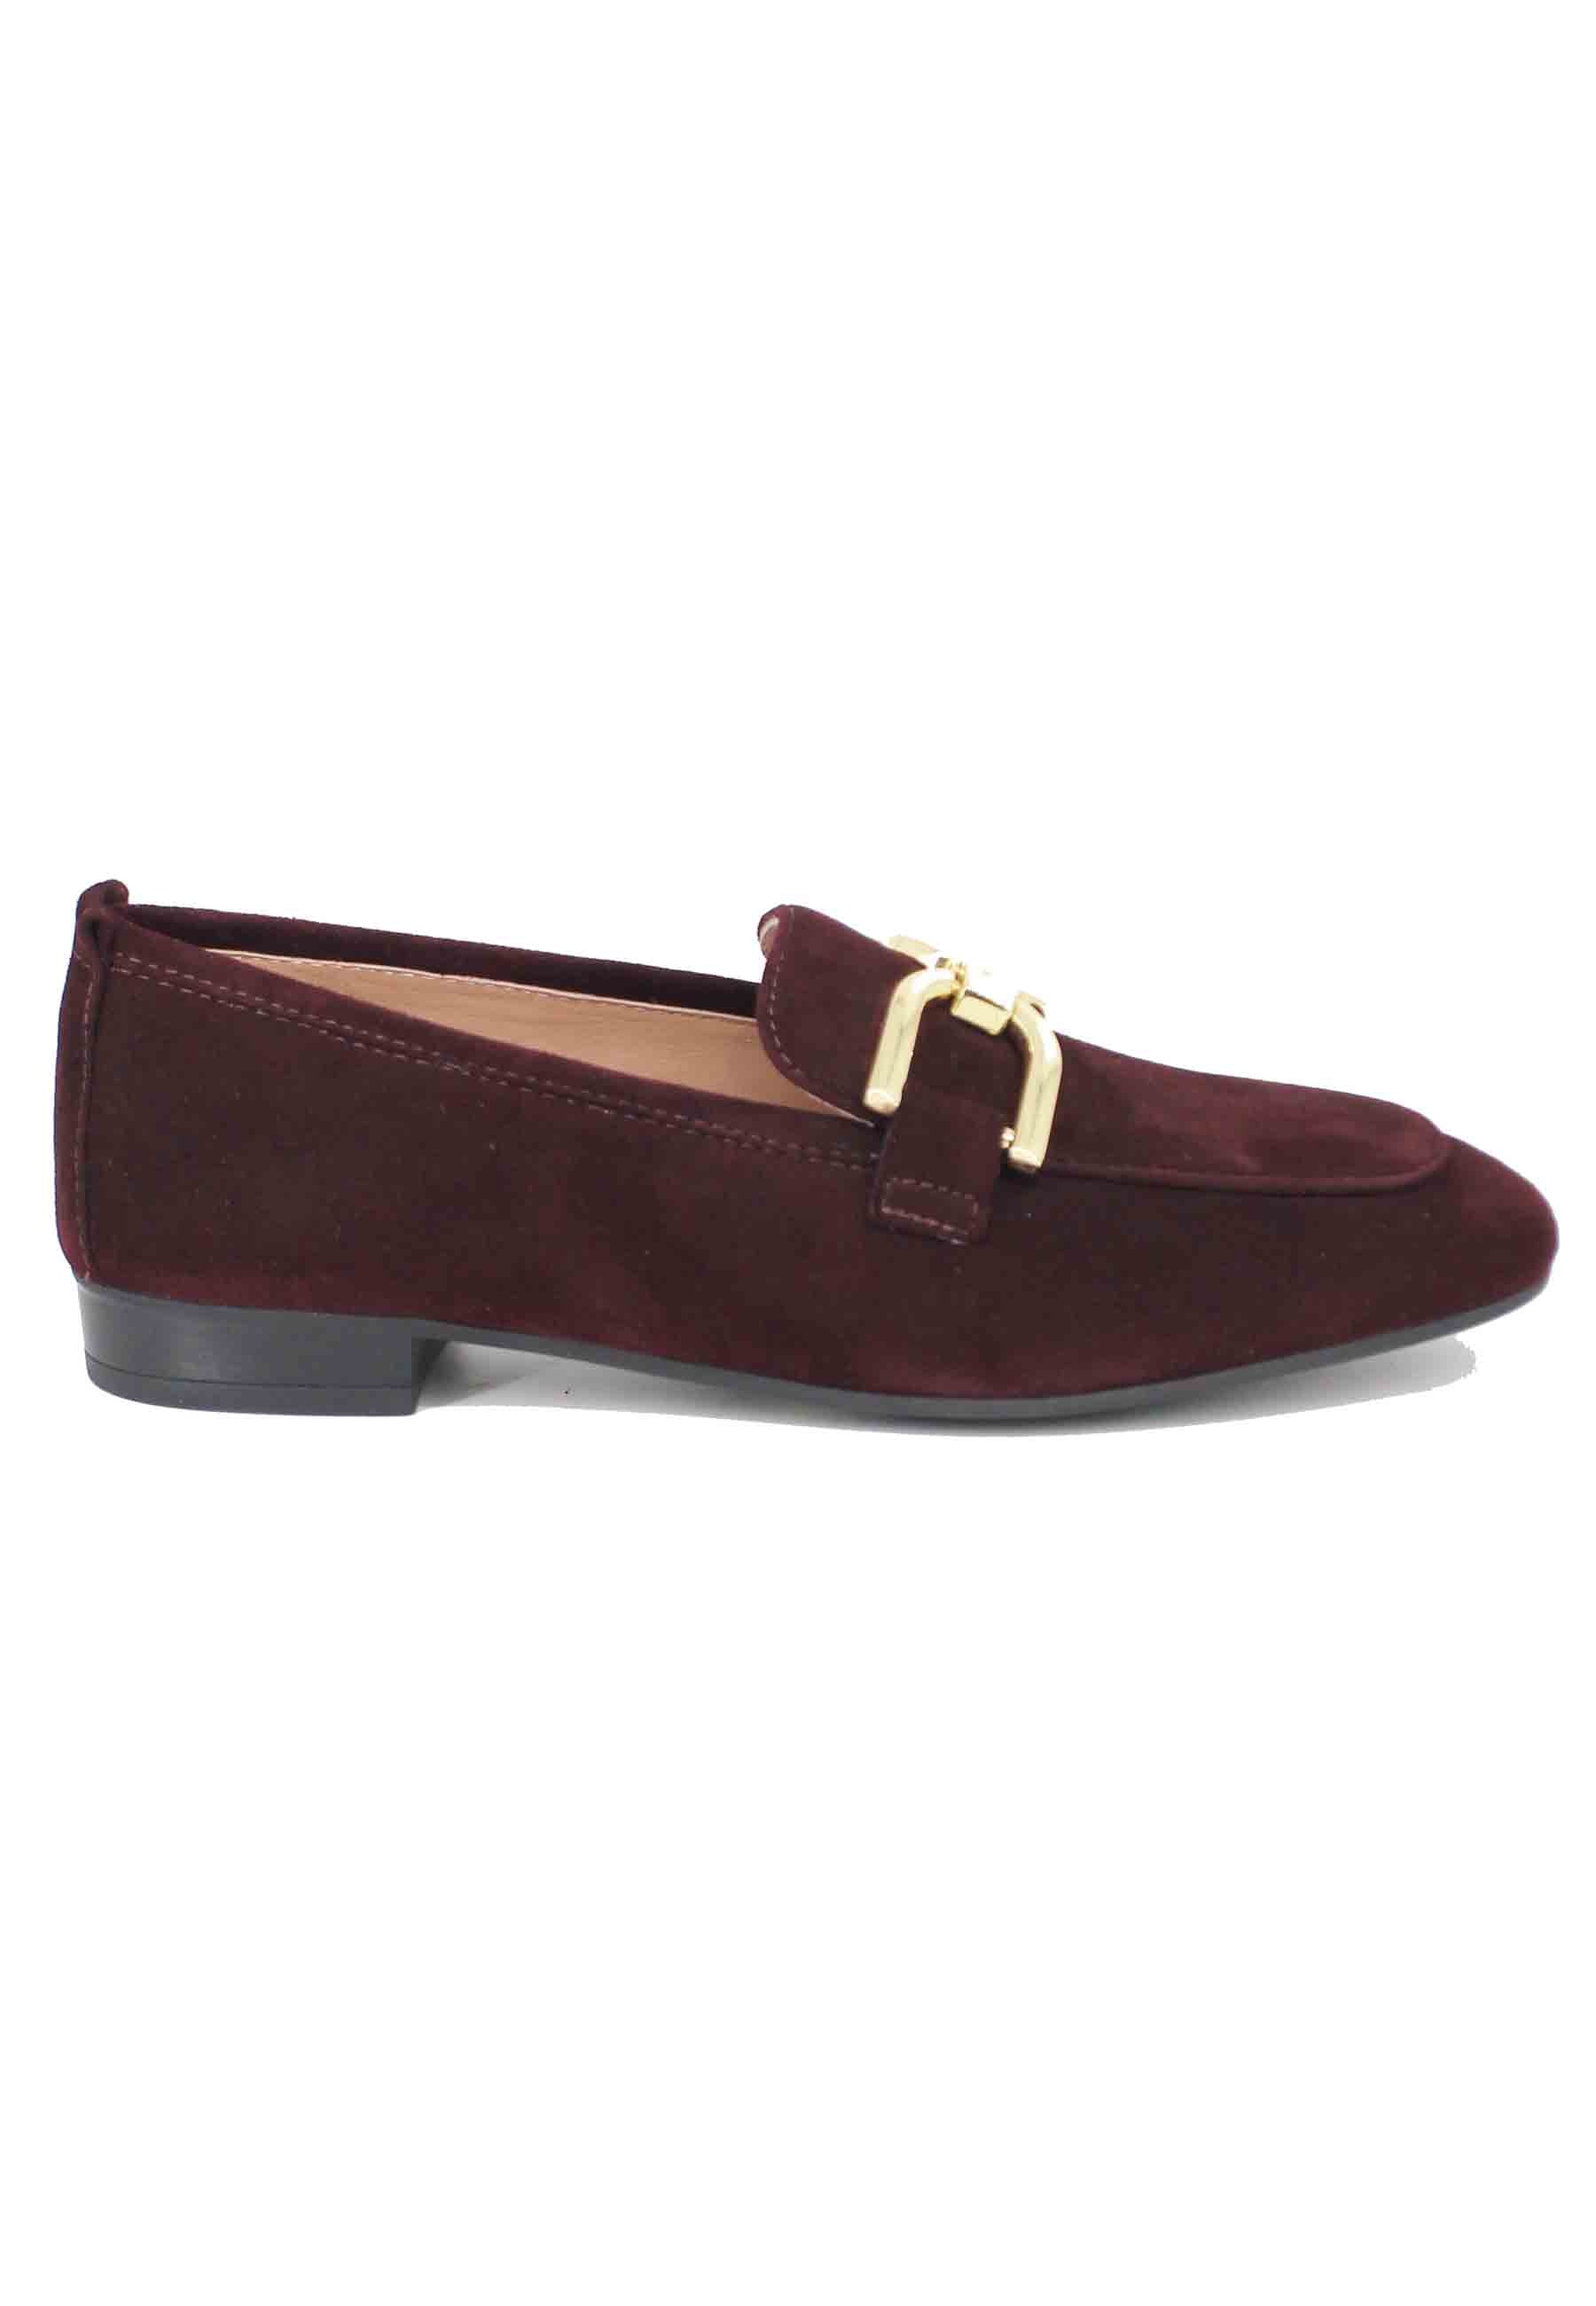 Women's moccasins in burgundy suede with gold horsebit